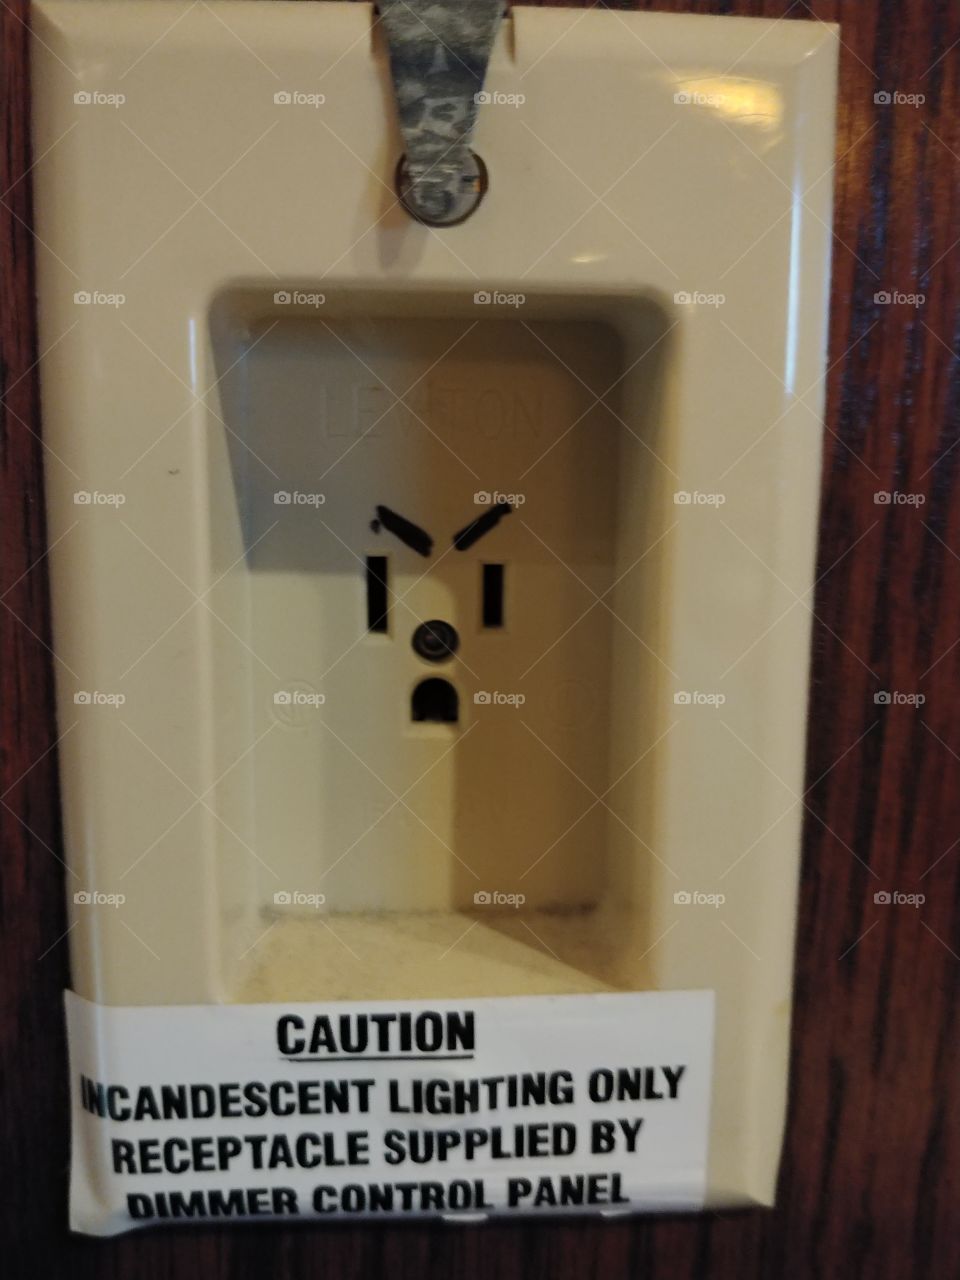 A creative electrical socket that looks like it is angry.